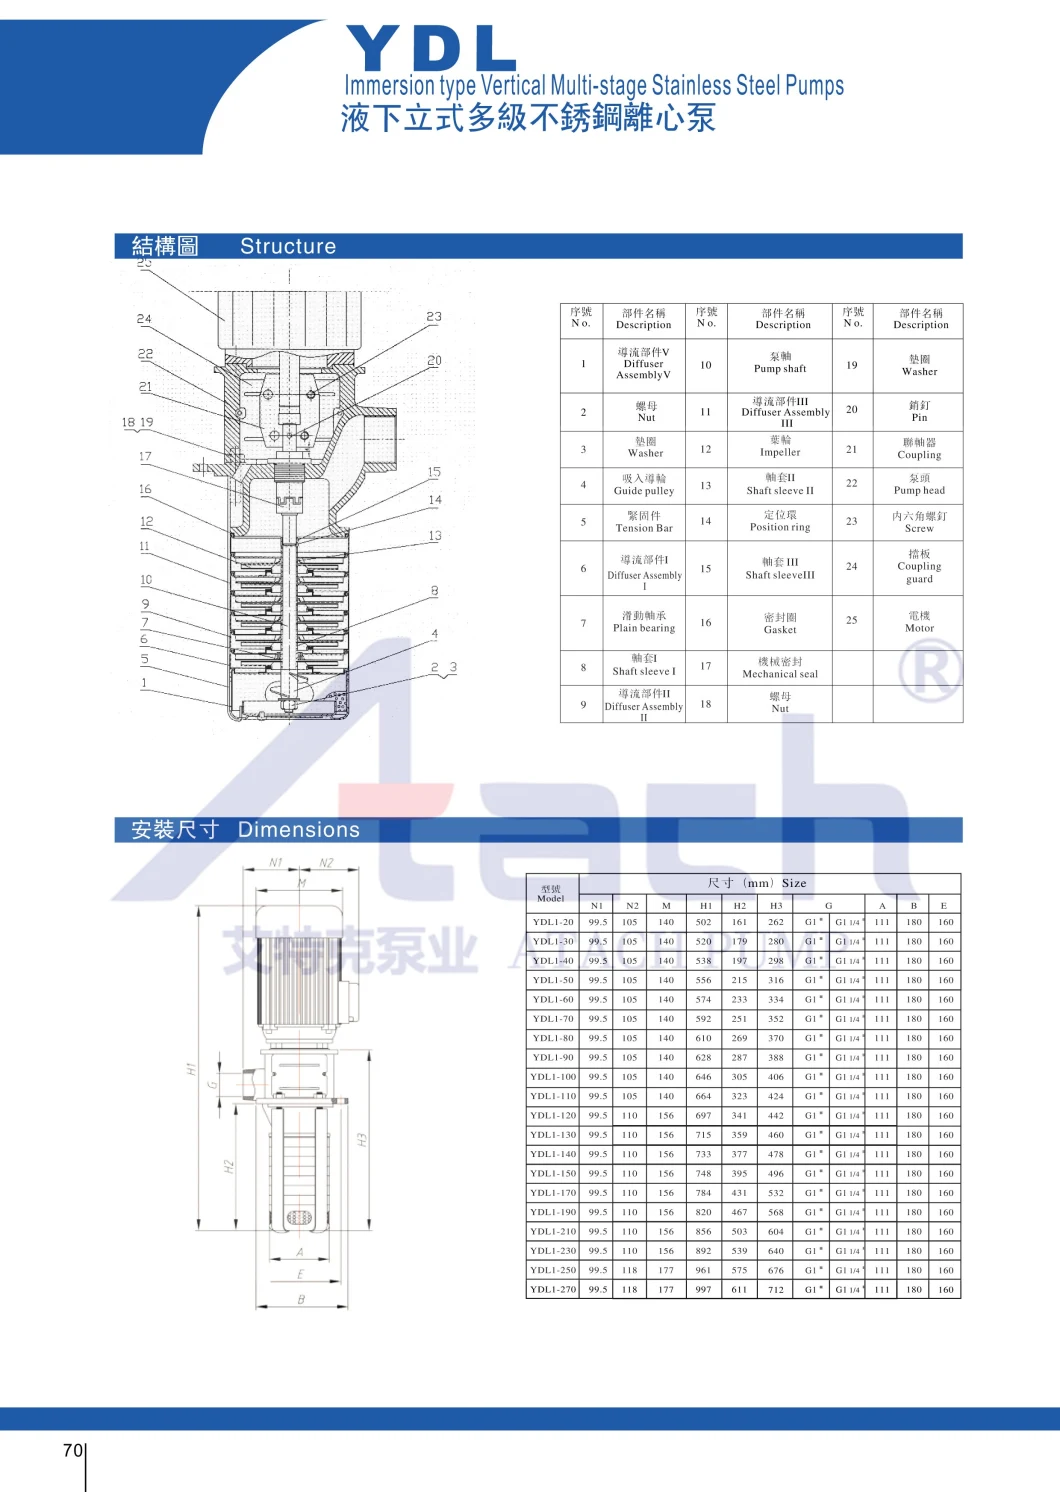 Immersion Type Vertical Multi-Stage Stainless Steel Pumps Ydl1-20